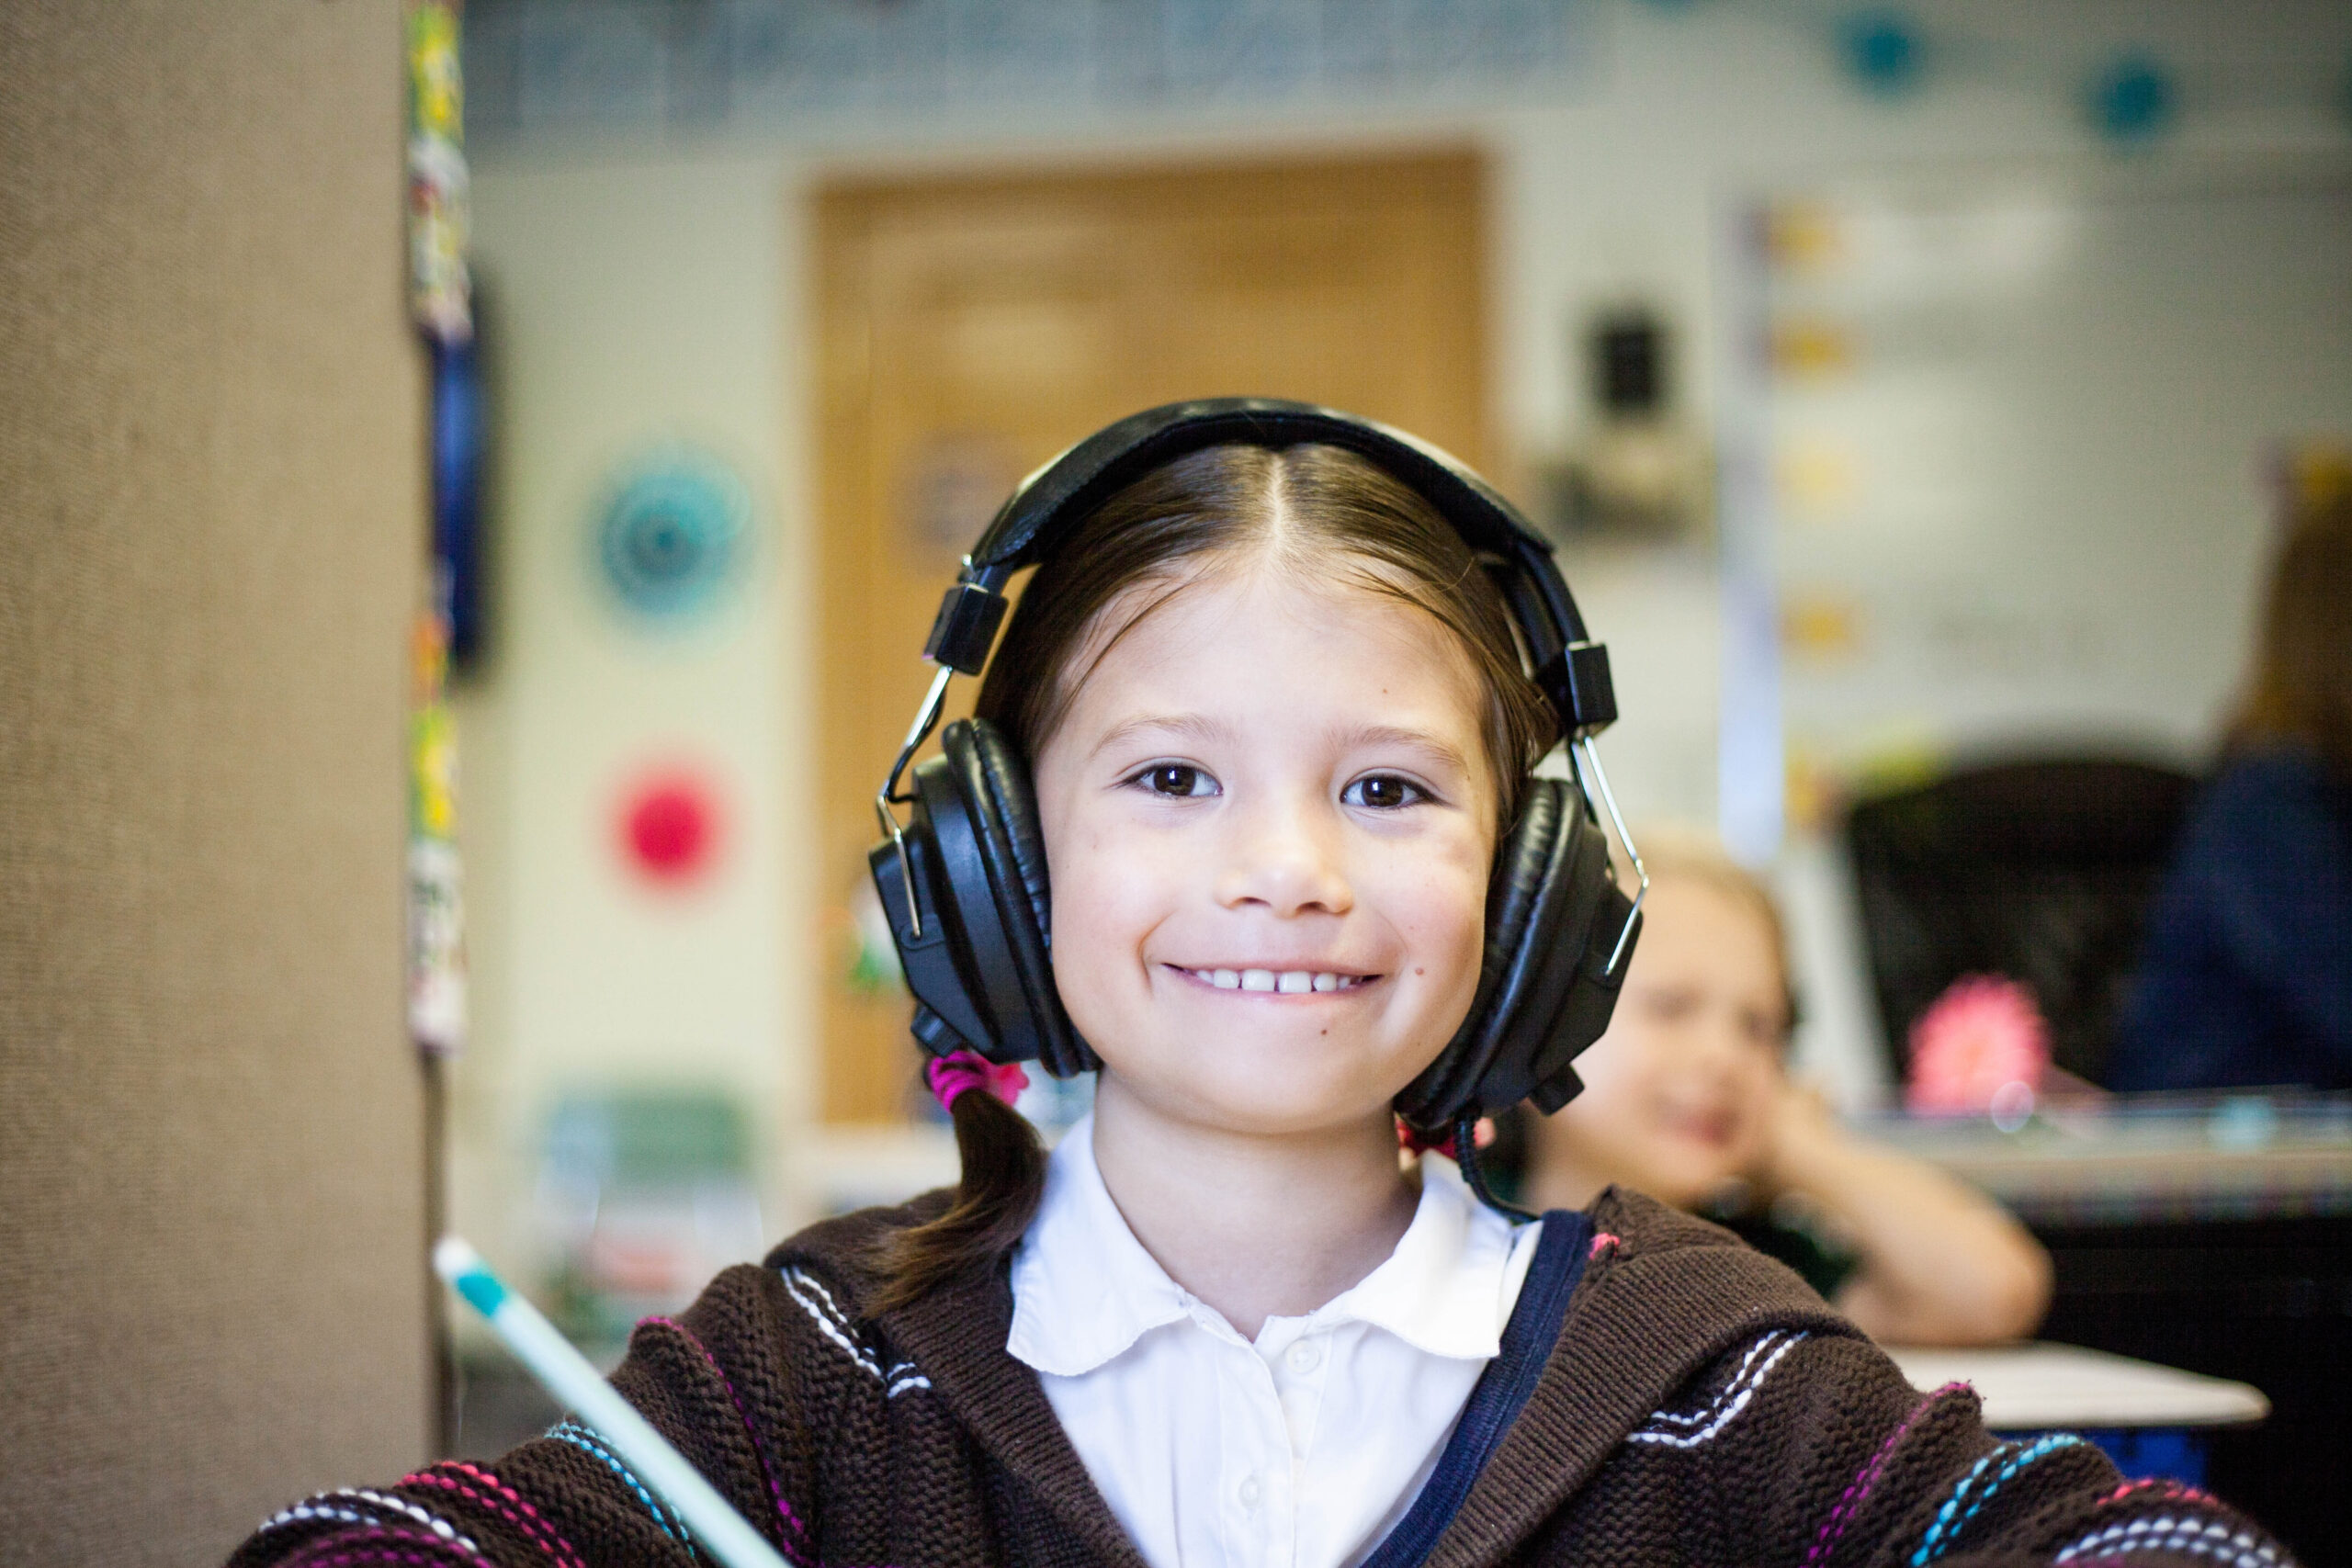 Young girl in school with headphones on